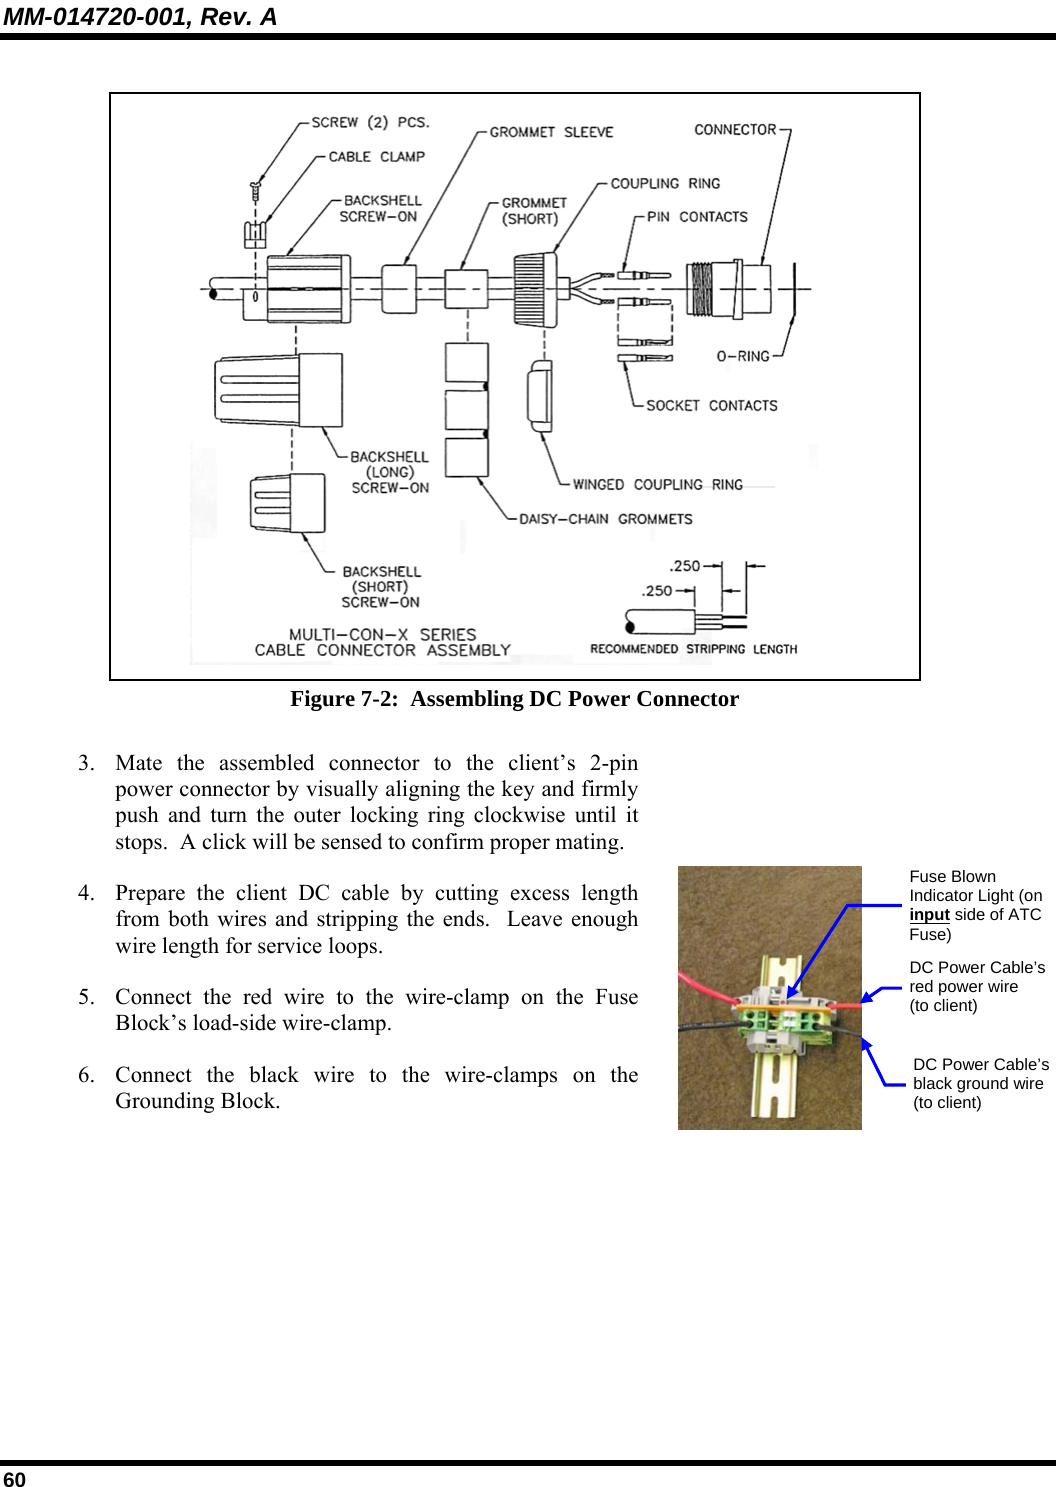 MM-014720-001, Rev. A 60  Figure 7-2:  Assembling DC Power Connector 3. Mate the assembled connector to the client’s 2-pin power connector by visually aligning the key and firmly push and turn the outer locking ring clockwise until it stops.  A click will be sensed to confirm proper mating.  4. Prepare the client DC cable by cutting excess length from both wires and stripping the ends.  Leave enough wire length for service loops. 5. Connect the red wire to the wire-clamp on the Fuse Block’s load-side wire-clamp. 6. Connect the black wire to the wire-clamps on the Grounding Block.  DC Power Cable’s red power wire (to client) DC Power Cable’s black ground wire(to client) Fuse Blown Indicator Light (on input side of ATC Fuse) 